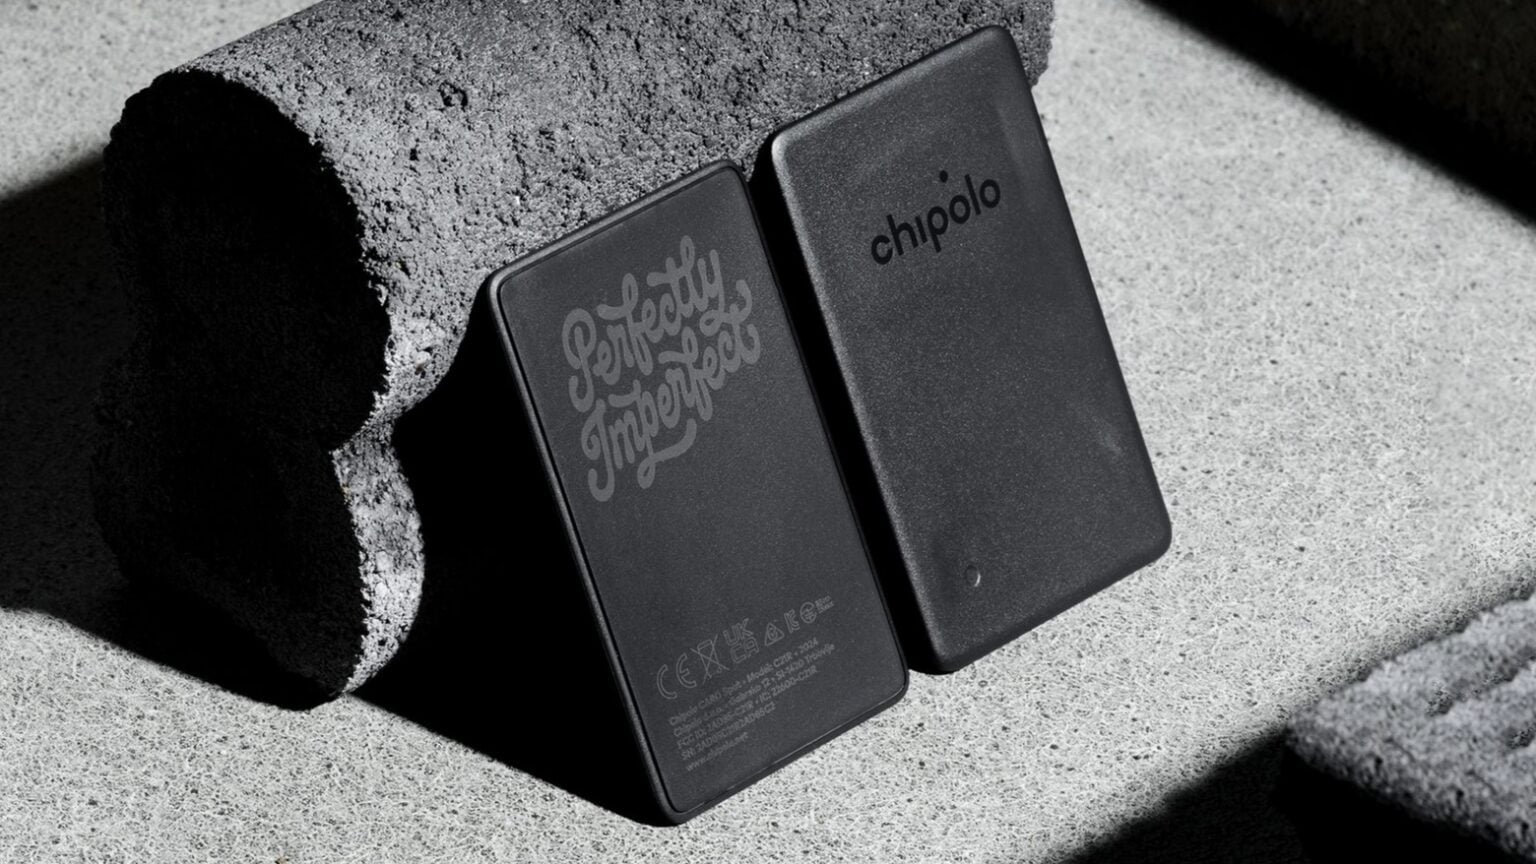 Chipolo Card Spot Perfectly Imperfect wallet tracker